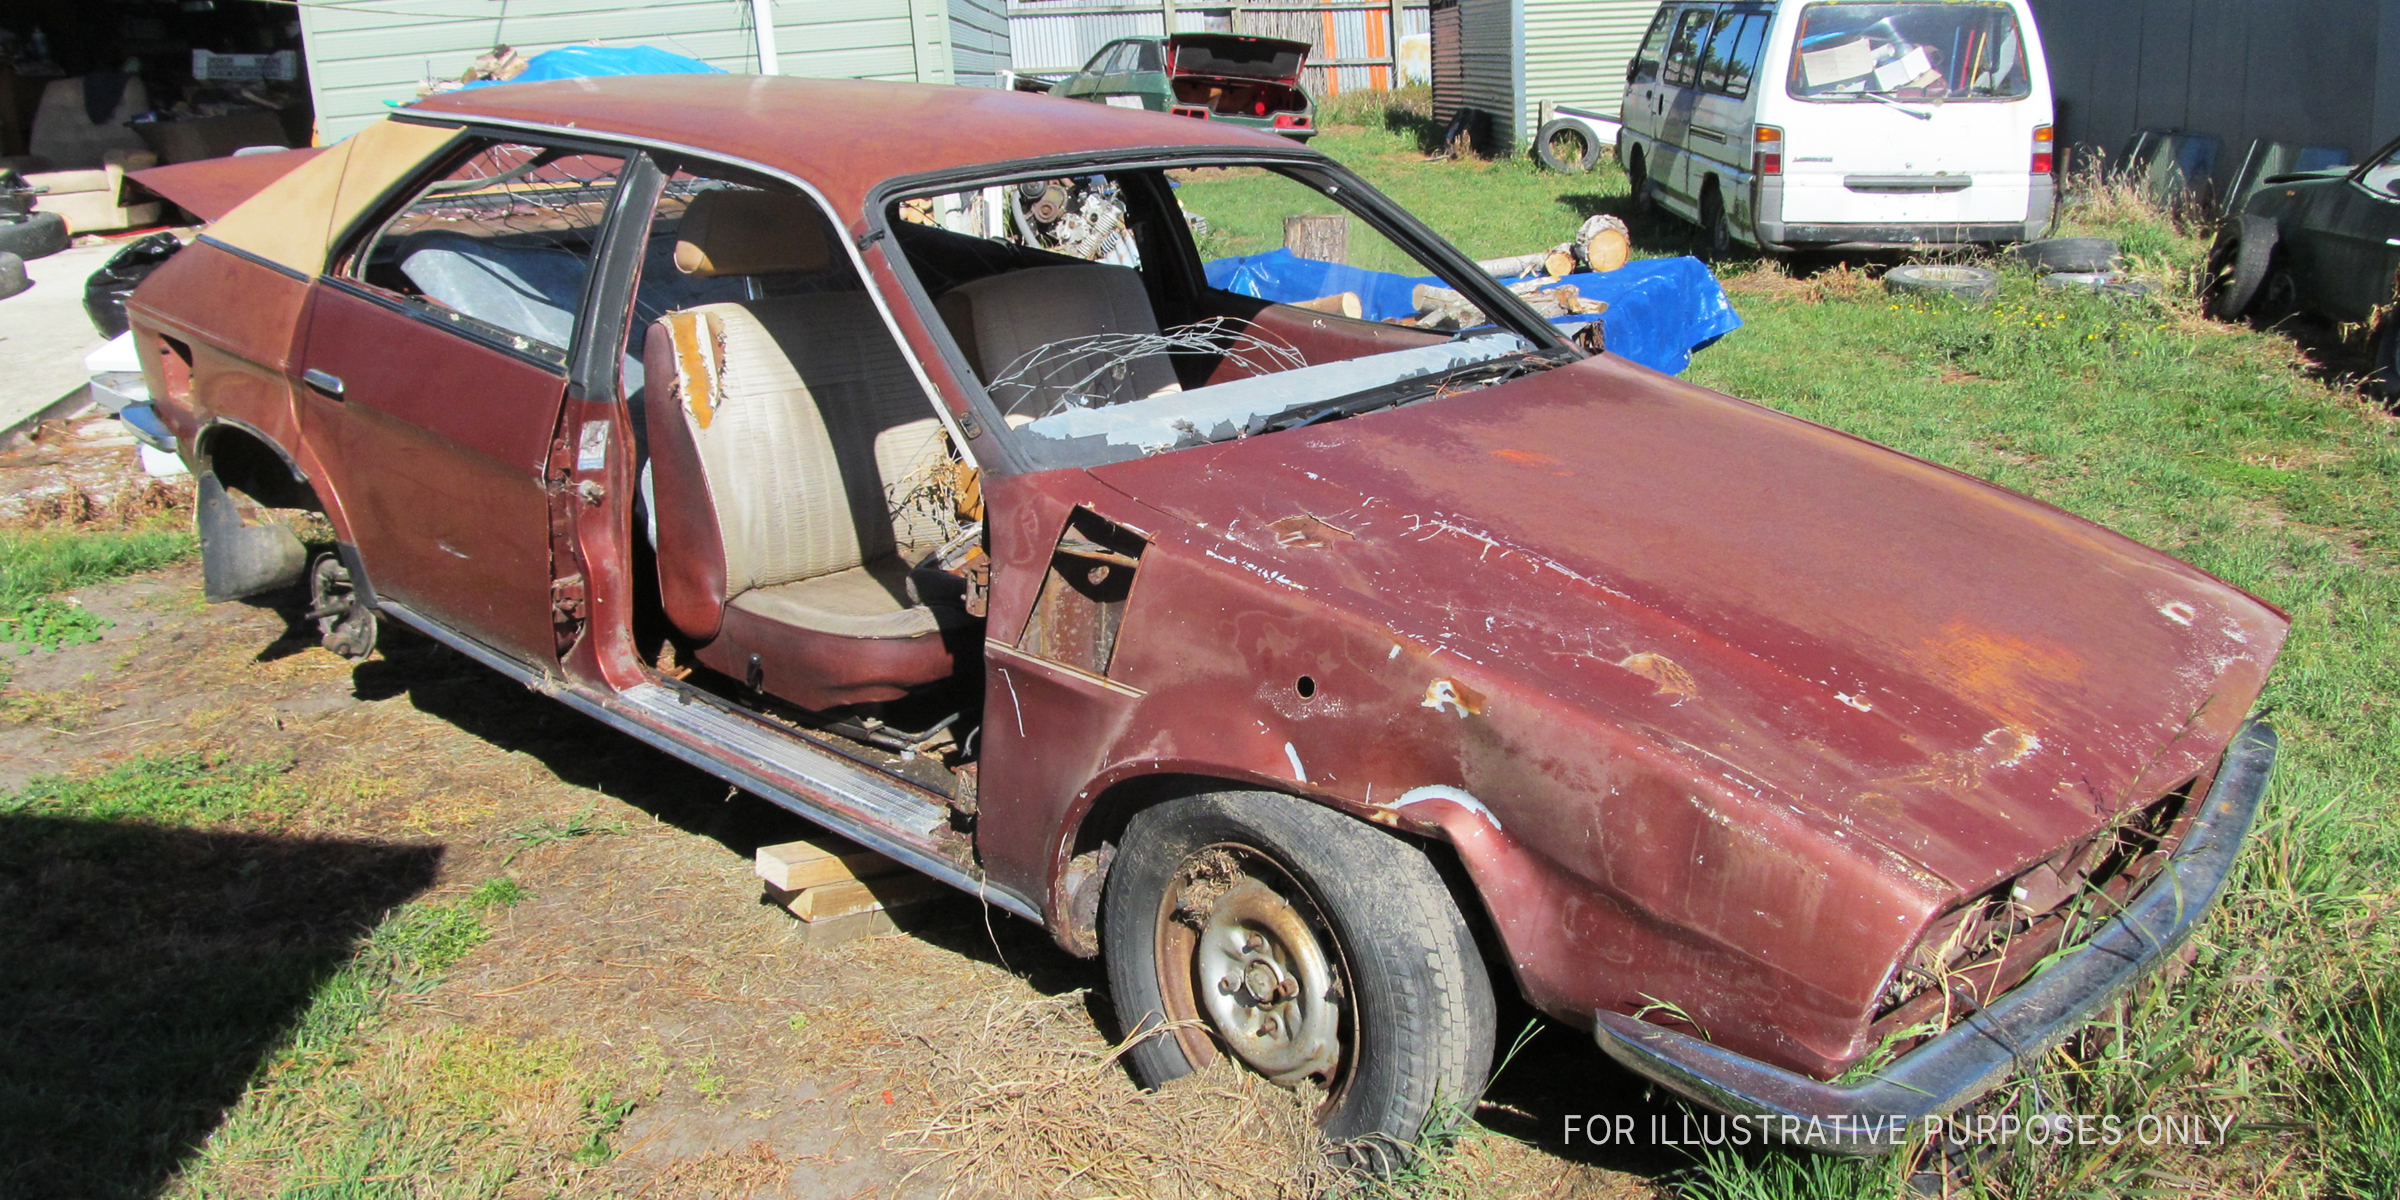 Old Car In Need Of Repairs. | Source: Flickr/NZ Car Freak (CC BY 2.0)